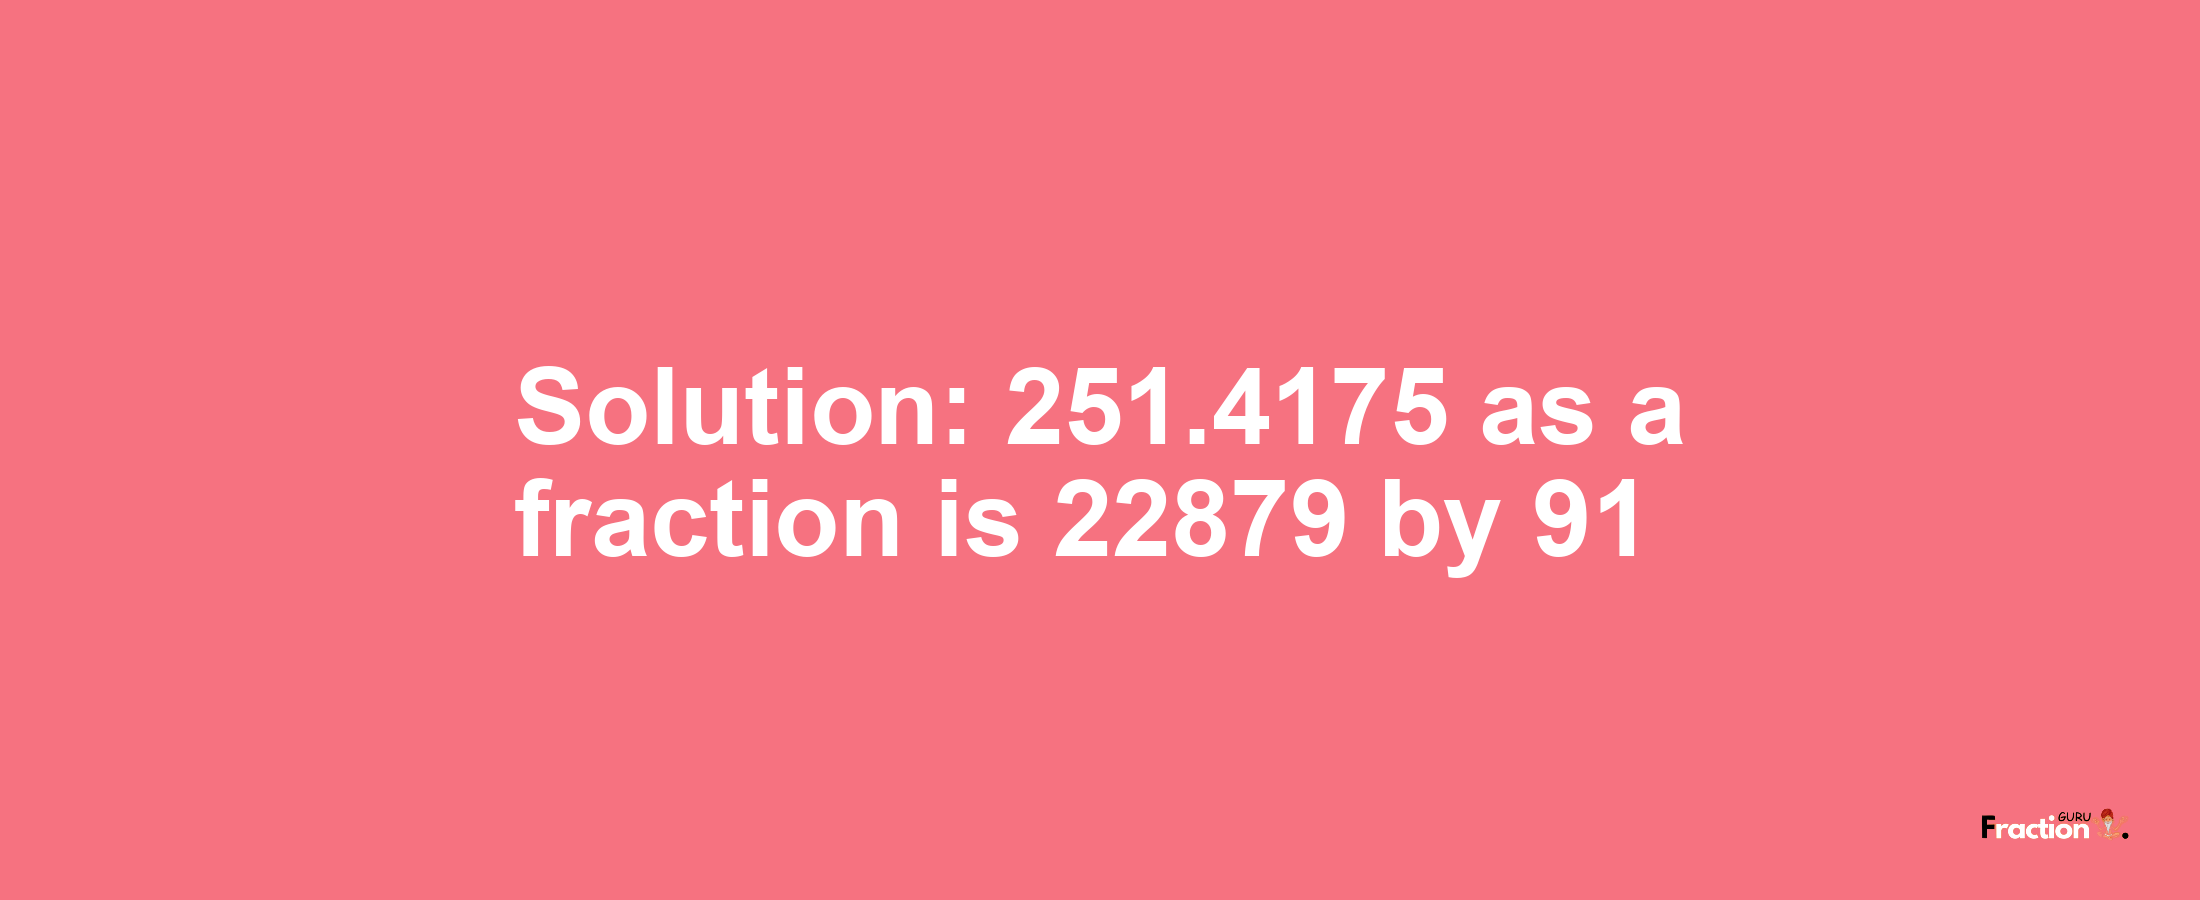 Solution:251.4175 as a fraction is 22879/91